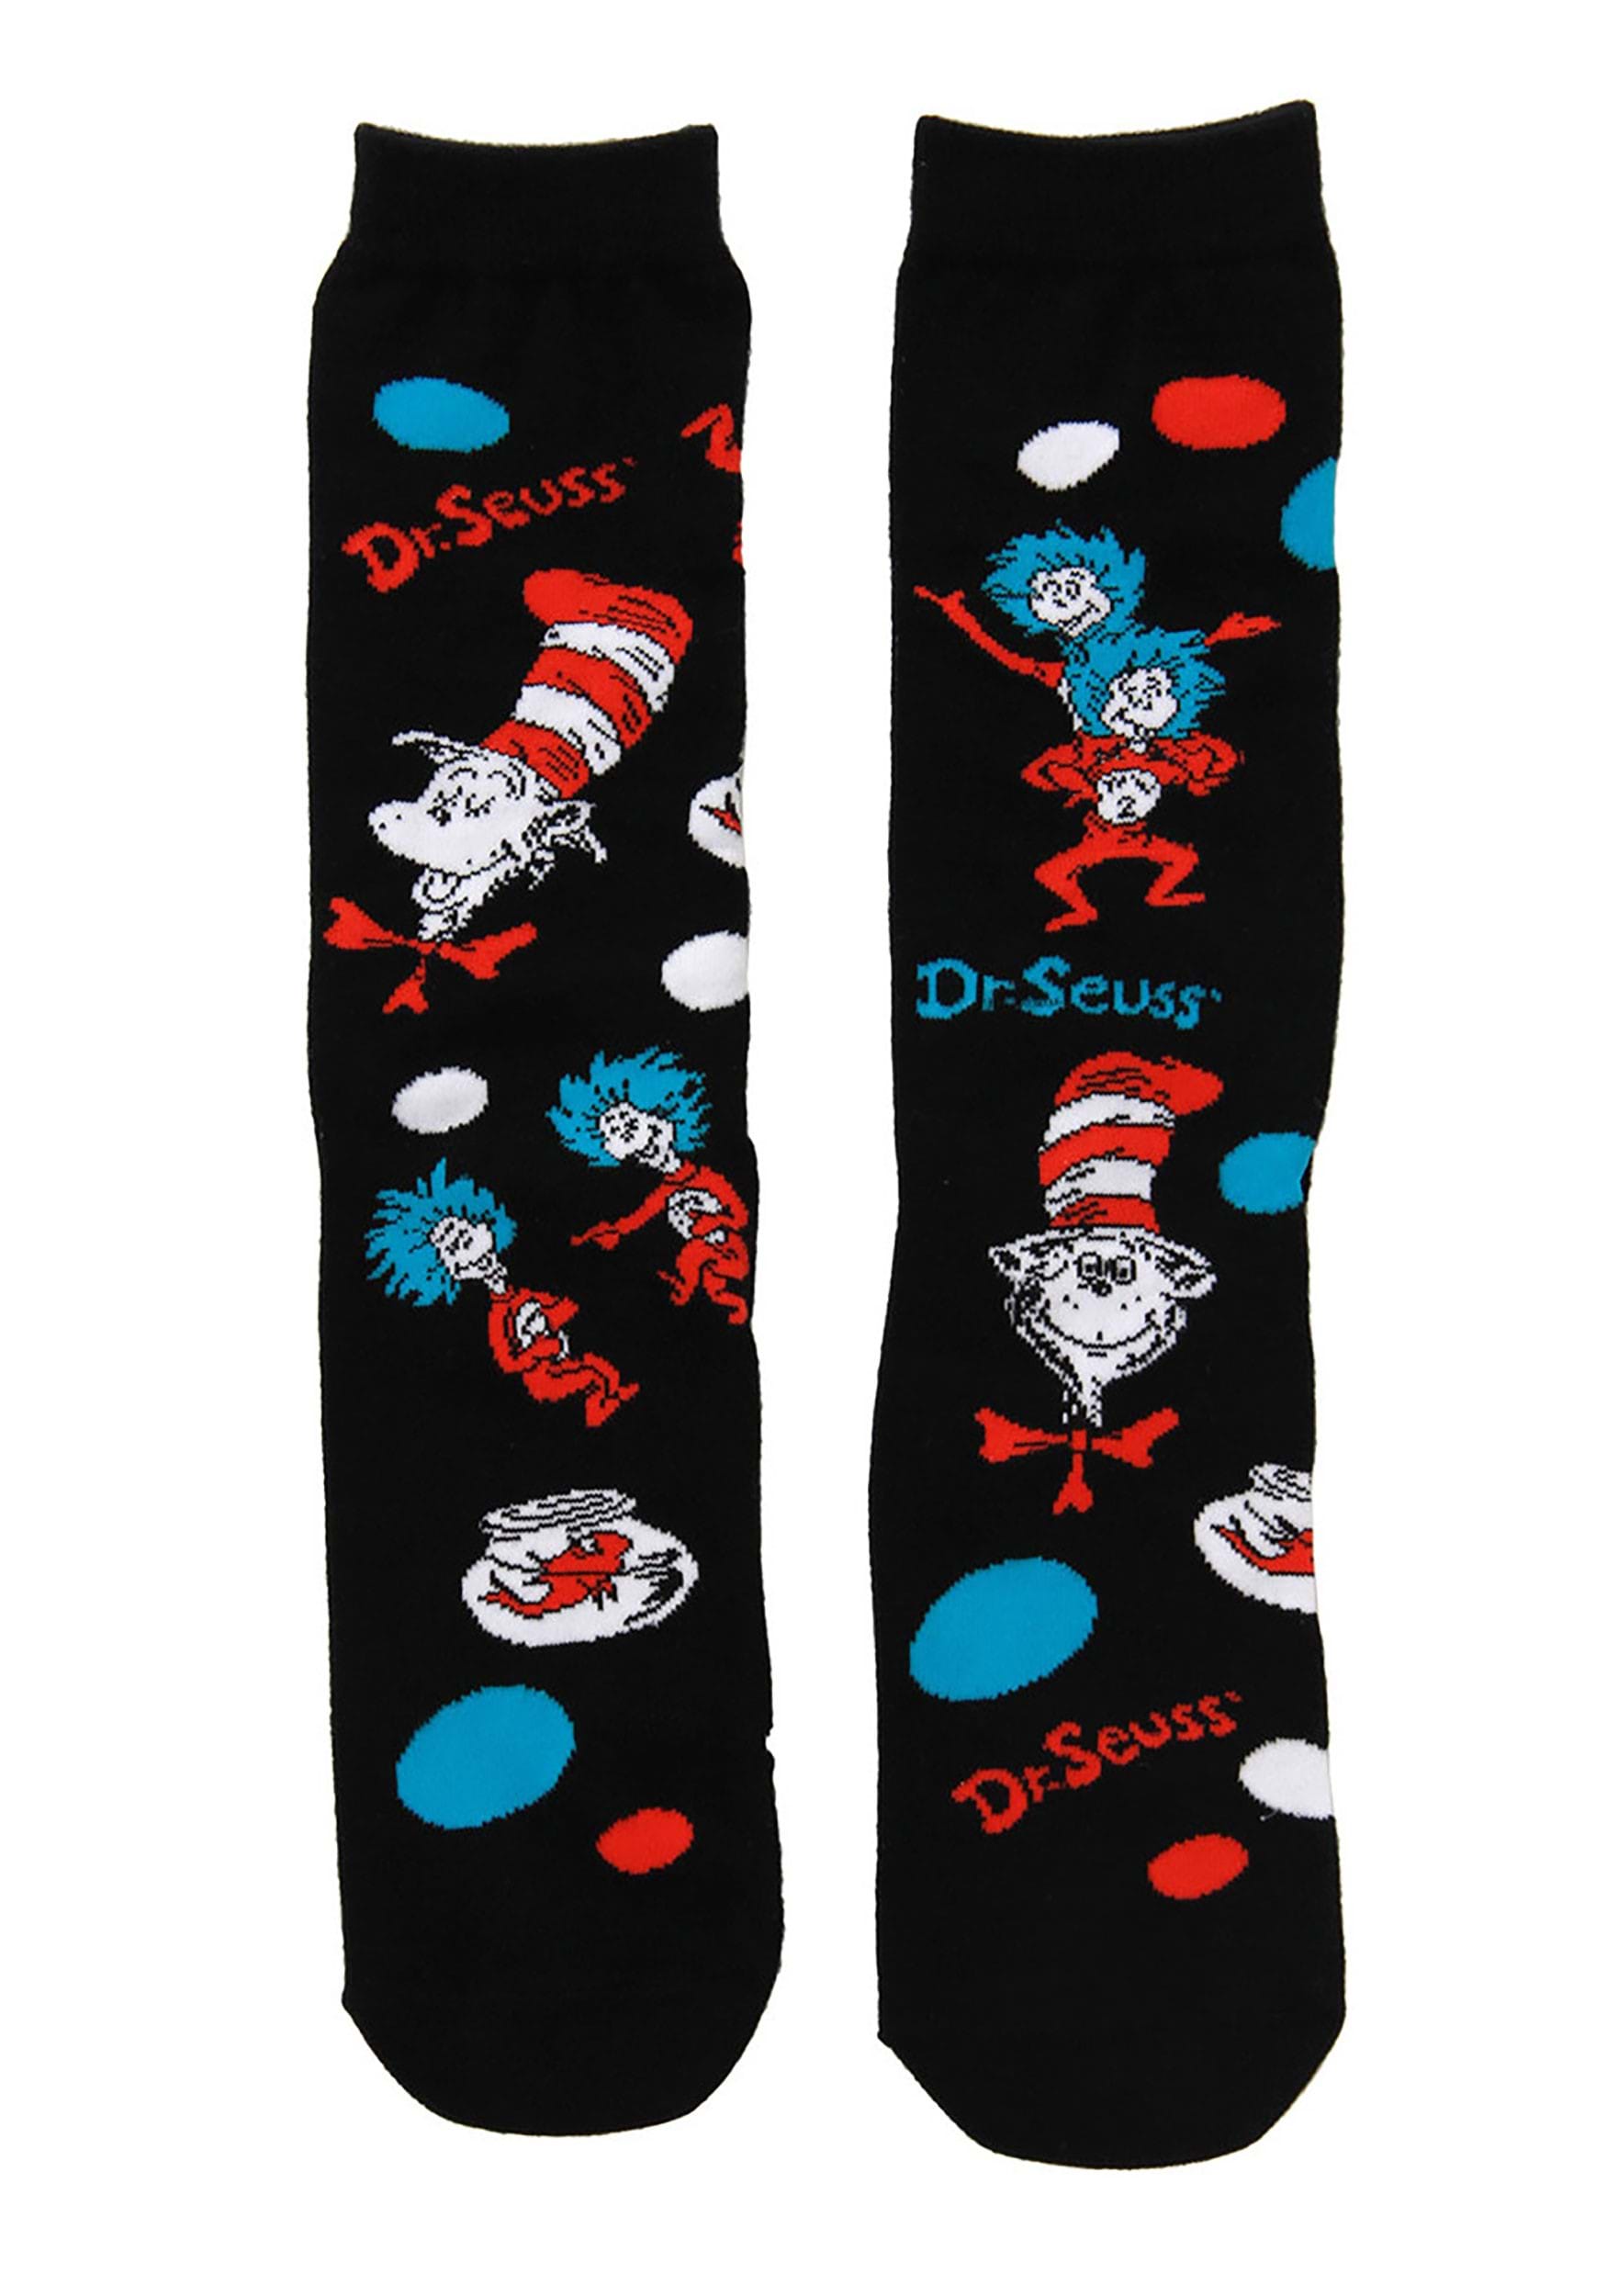 The Cat In The Hat Pattern Socks for Adults